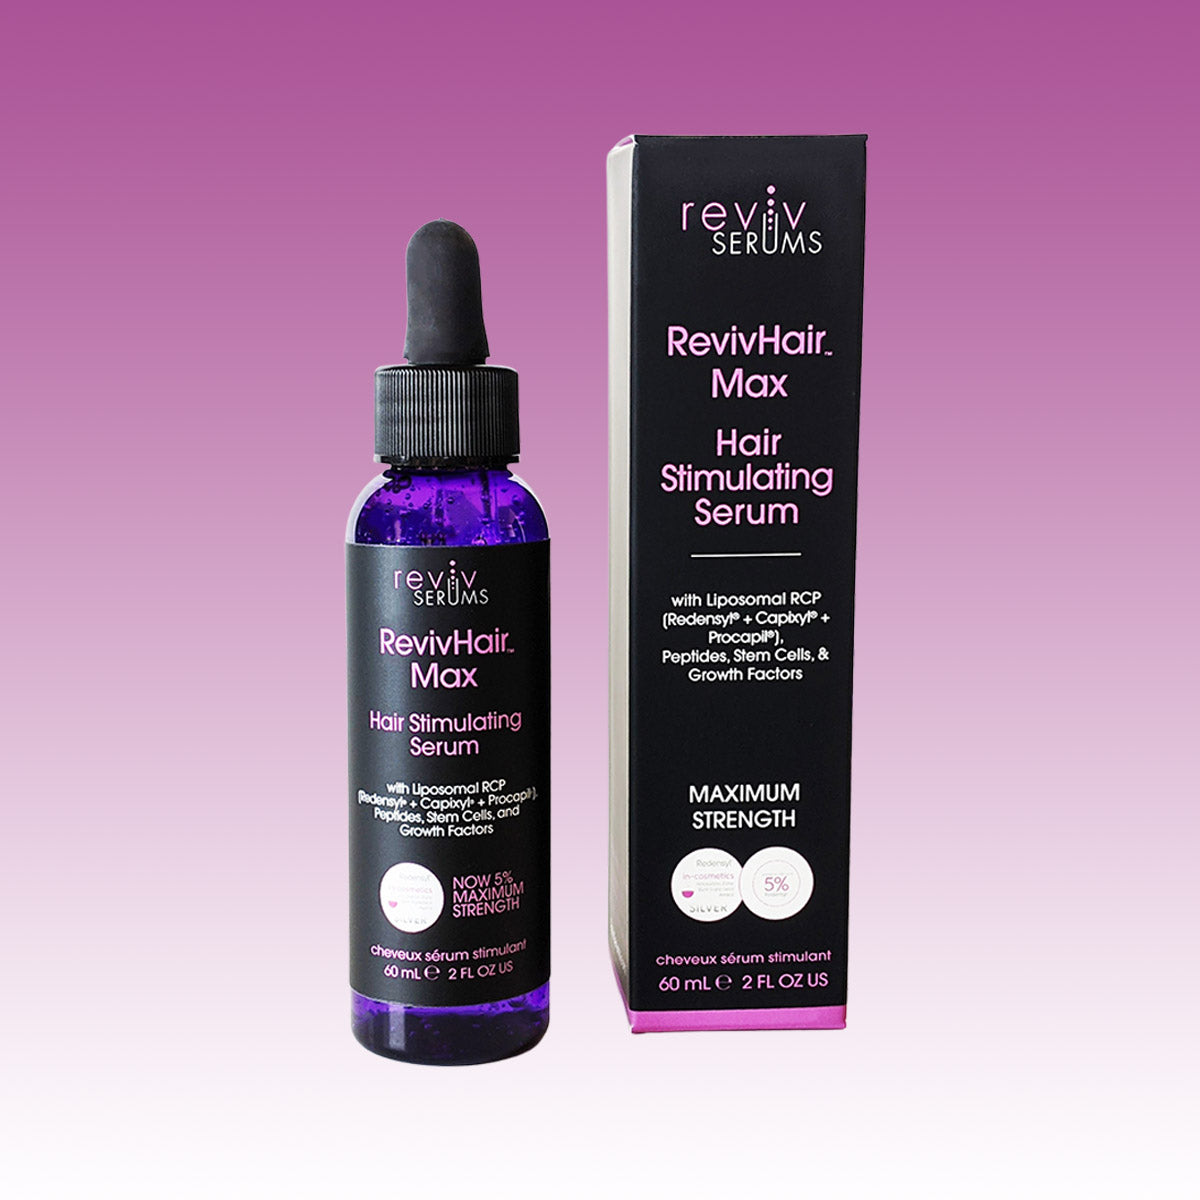 RevivHair™ Max Serum – Stimulating Redensyl for RCP hair with thinning & 5